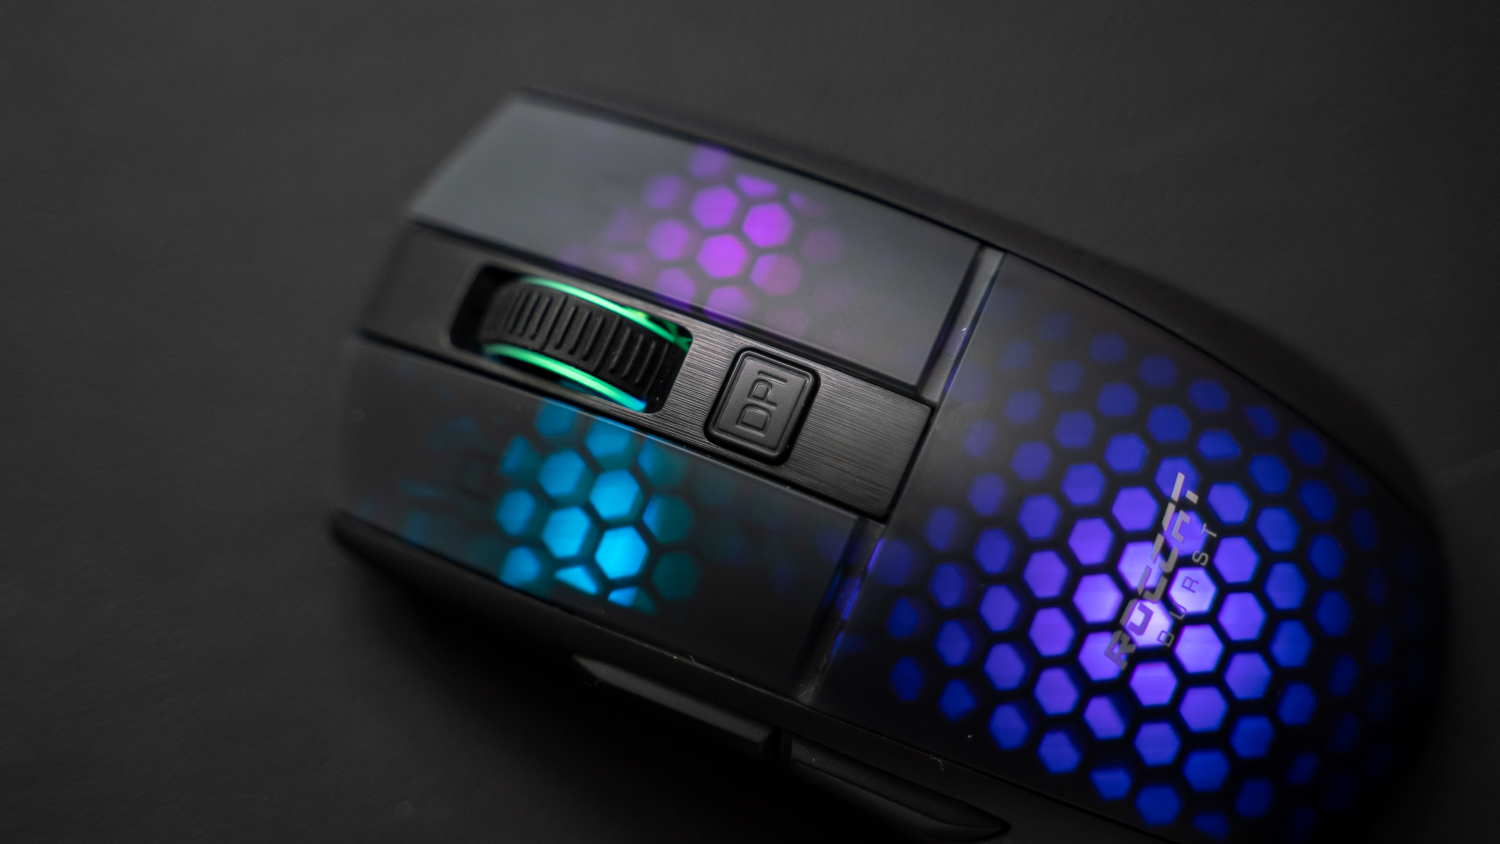 The Roccat Burst Pro Air mouse in all its RGB lighting glory